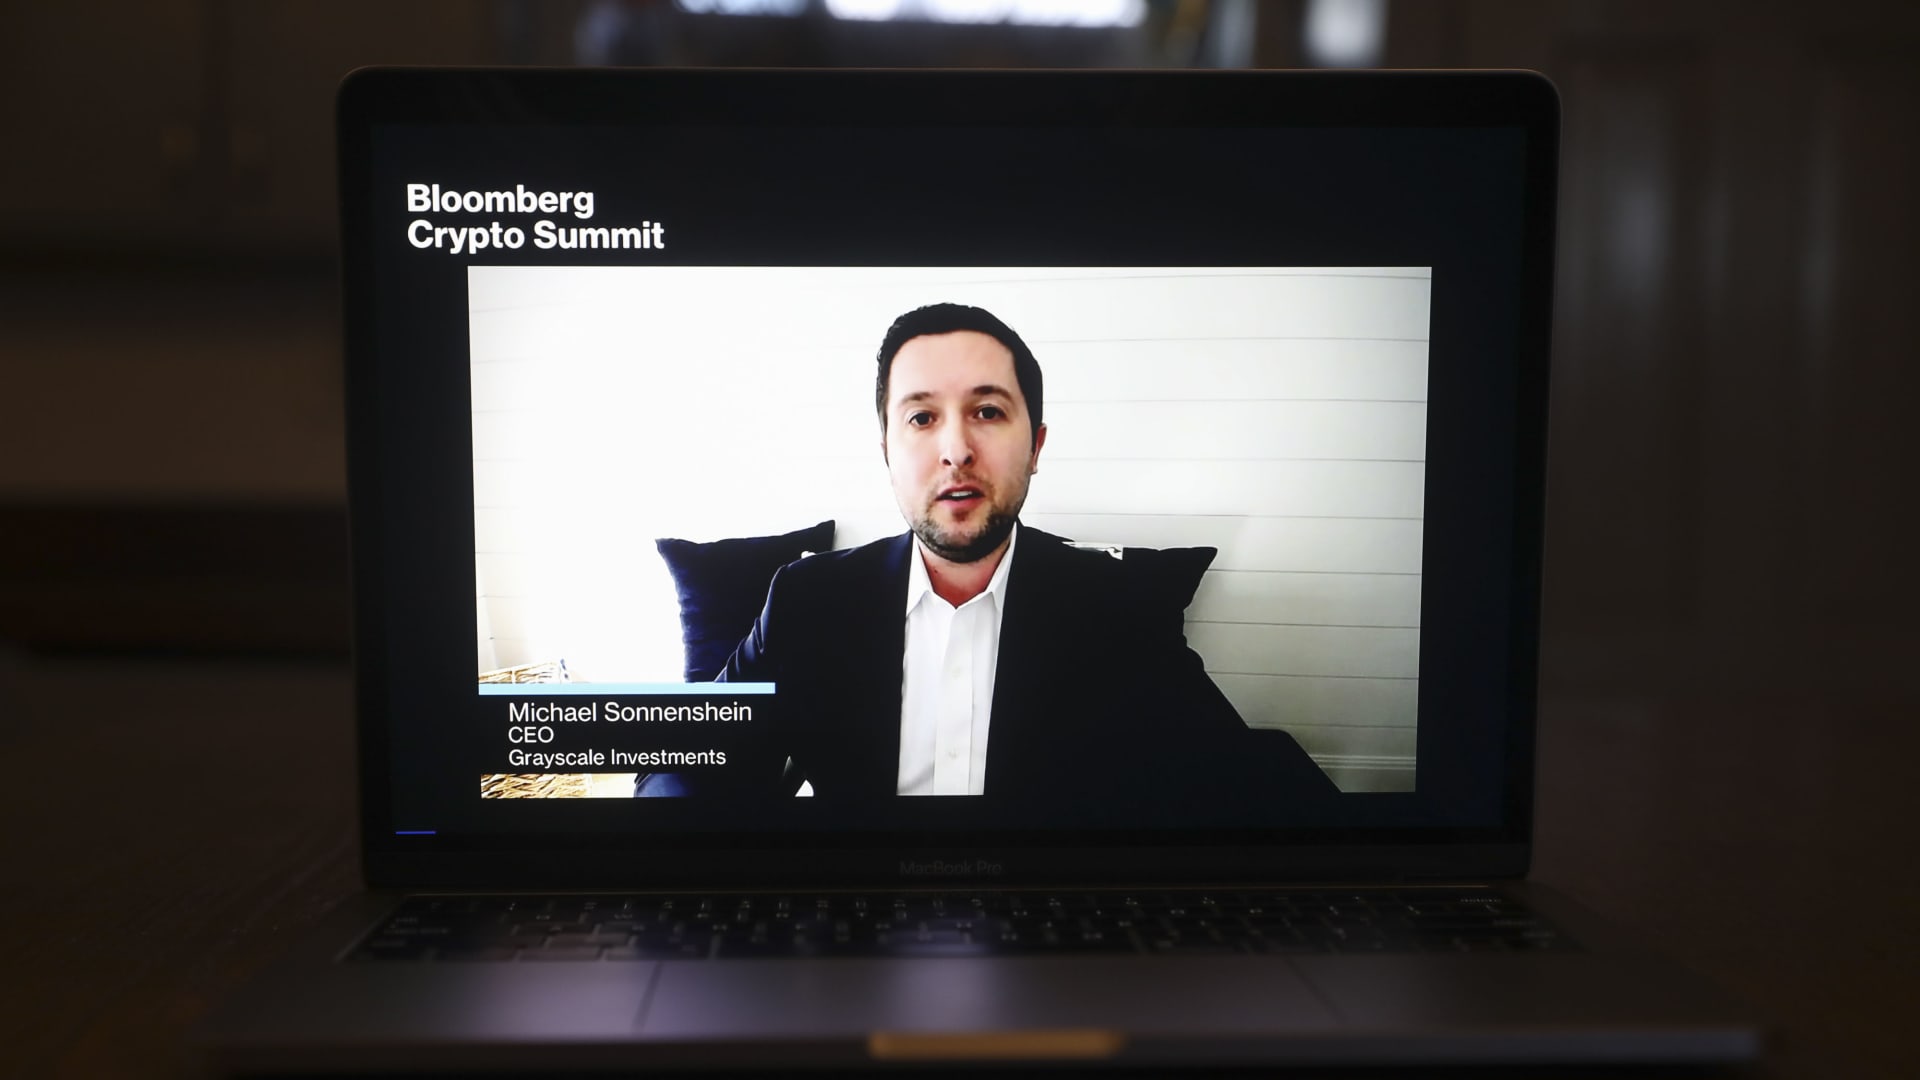 Michael Sonnenshein, chief executive officer of Grayscale Investments LLC, speaks virtually during a Crypto Summit Feb. 25, 2021.